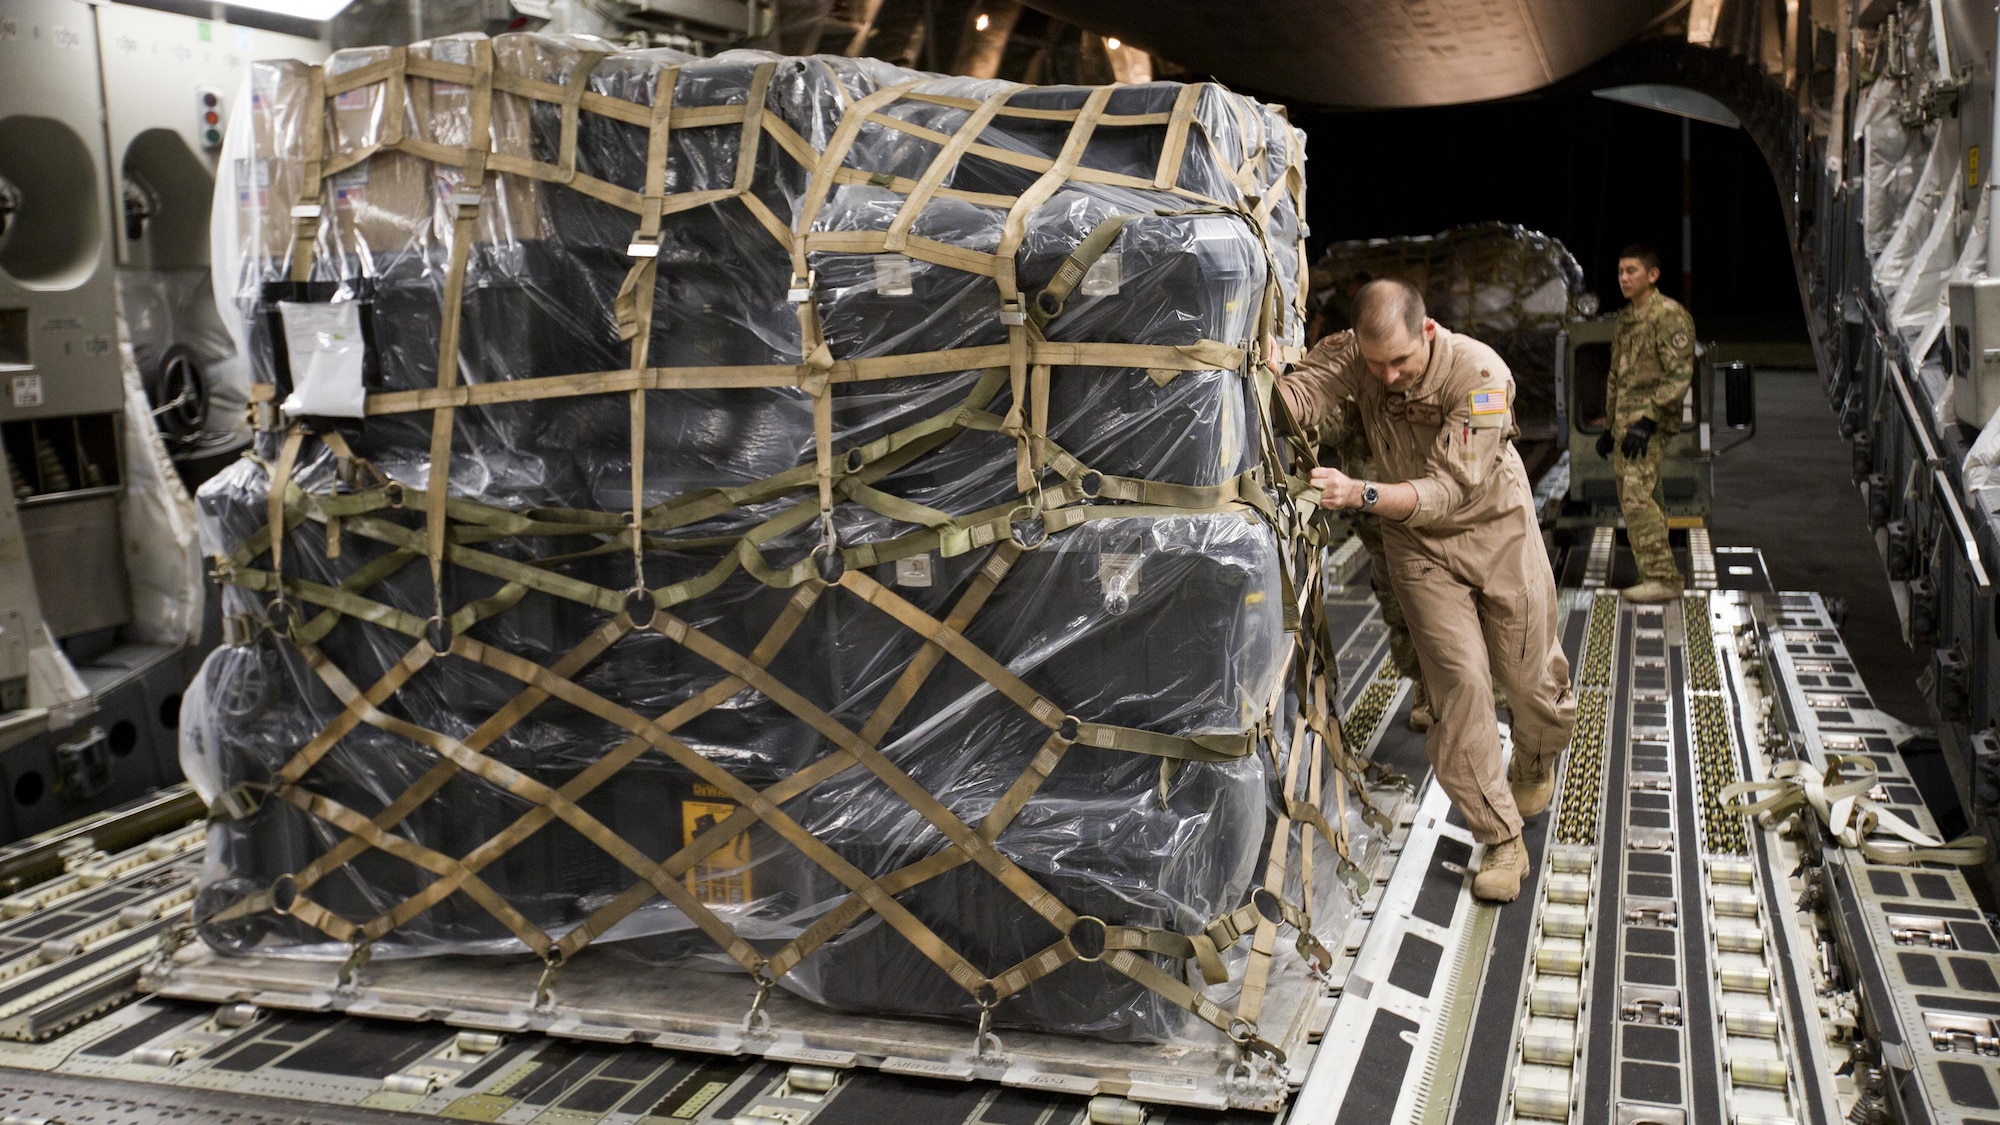 U.S. Air Force Maj. Robert Riggs, U.S. Marine Corps Forces, Special Operations Command air mobility liaison officer (AMLO), assists in loading cargo aboard a C-17 aircraft at MCAS Cherry Point. As MARSOC’s AMLO, Riggs provides a critical link of communication between the airlift and ground forces in the area of operations. He facilitated the mission from planning and coordination through hands-on facilitation by piloting the aircraft as it deployed and re-deployed two MARSOC units. (U.S. Marine Corps photo by Sgt. Salvador Moreno, released)